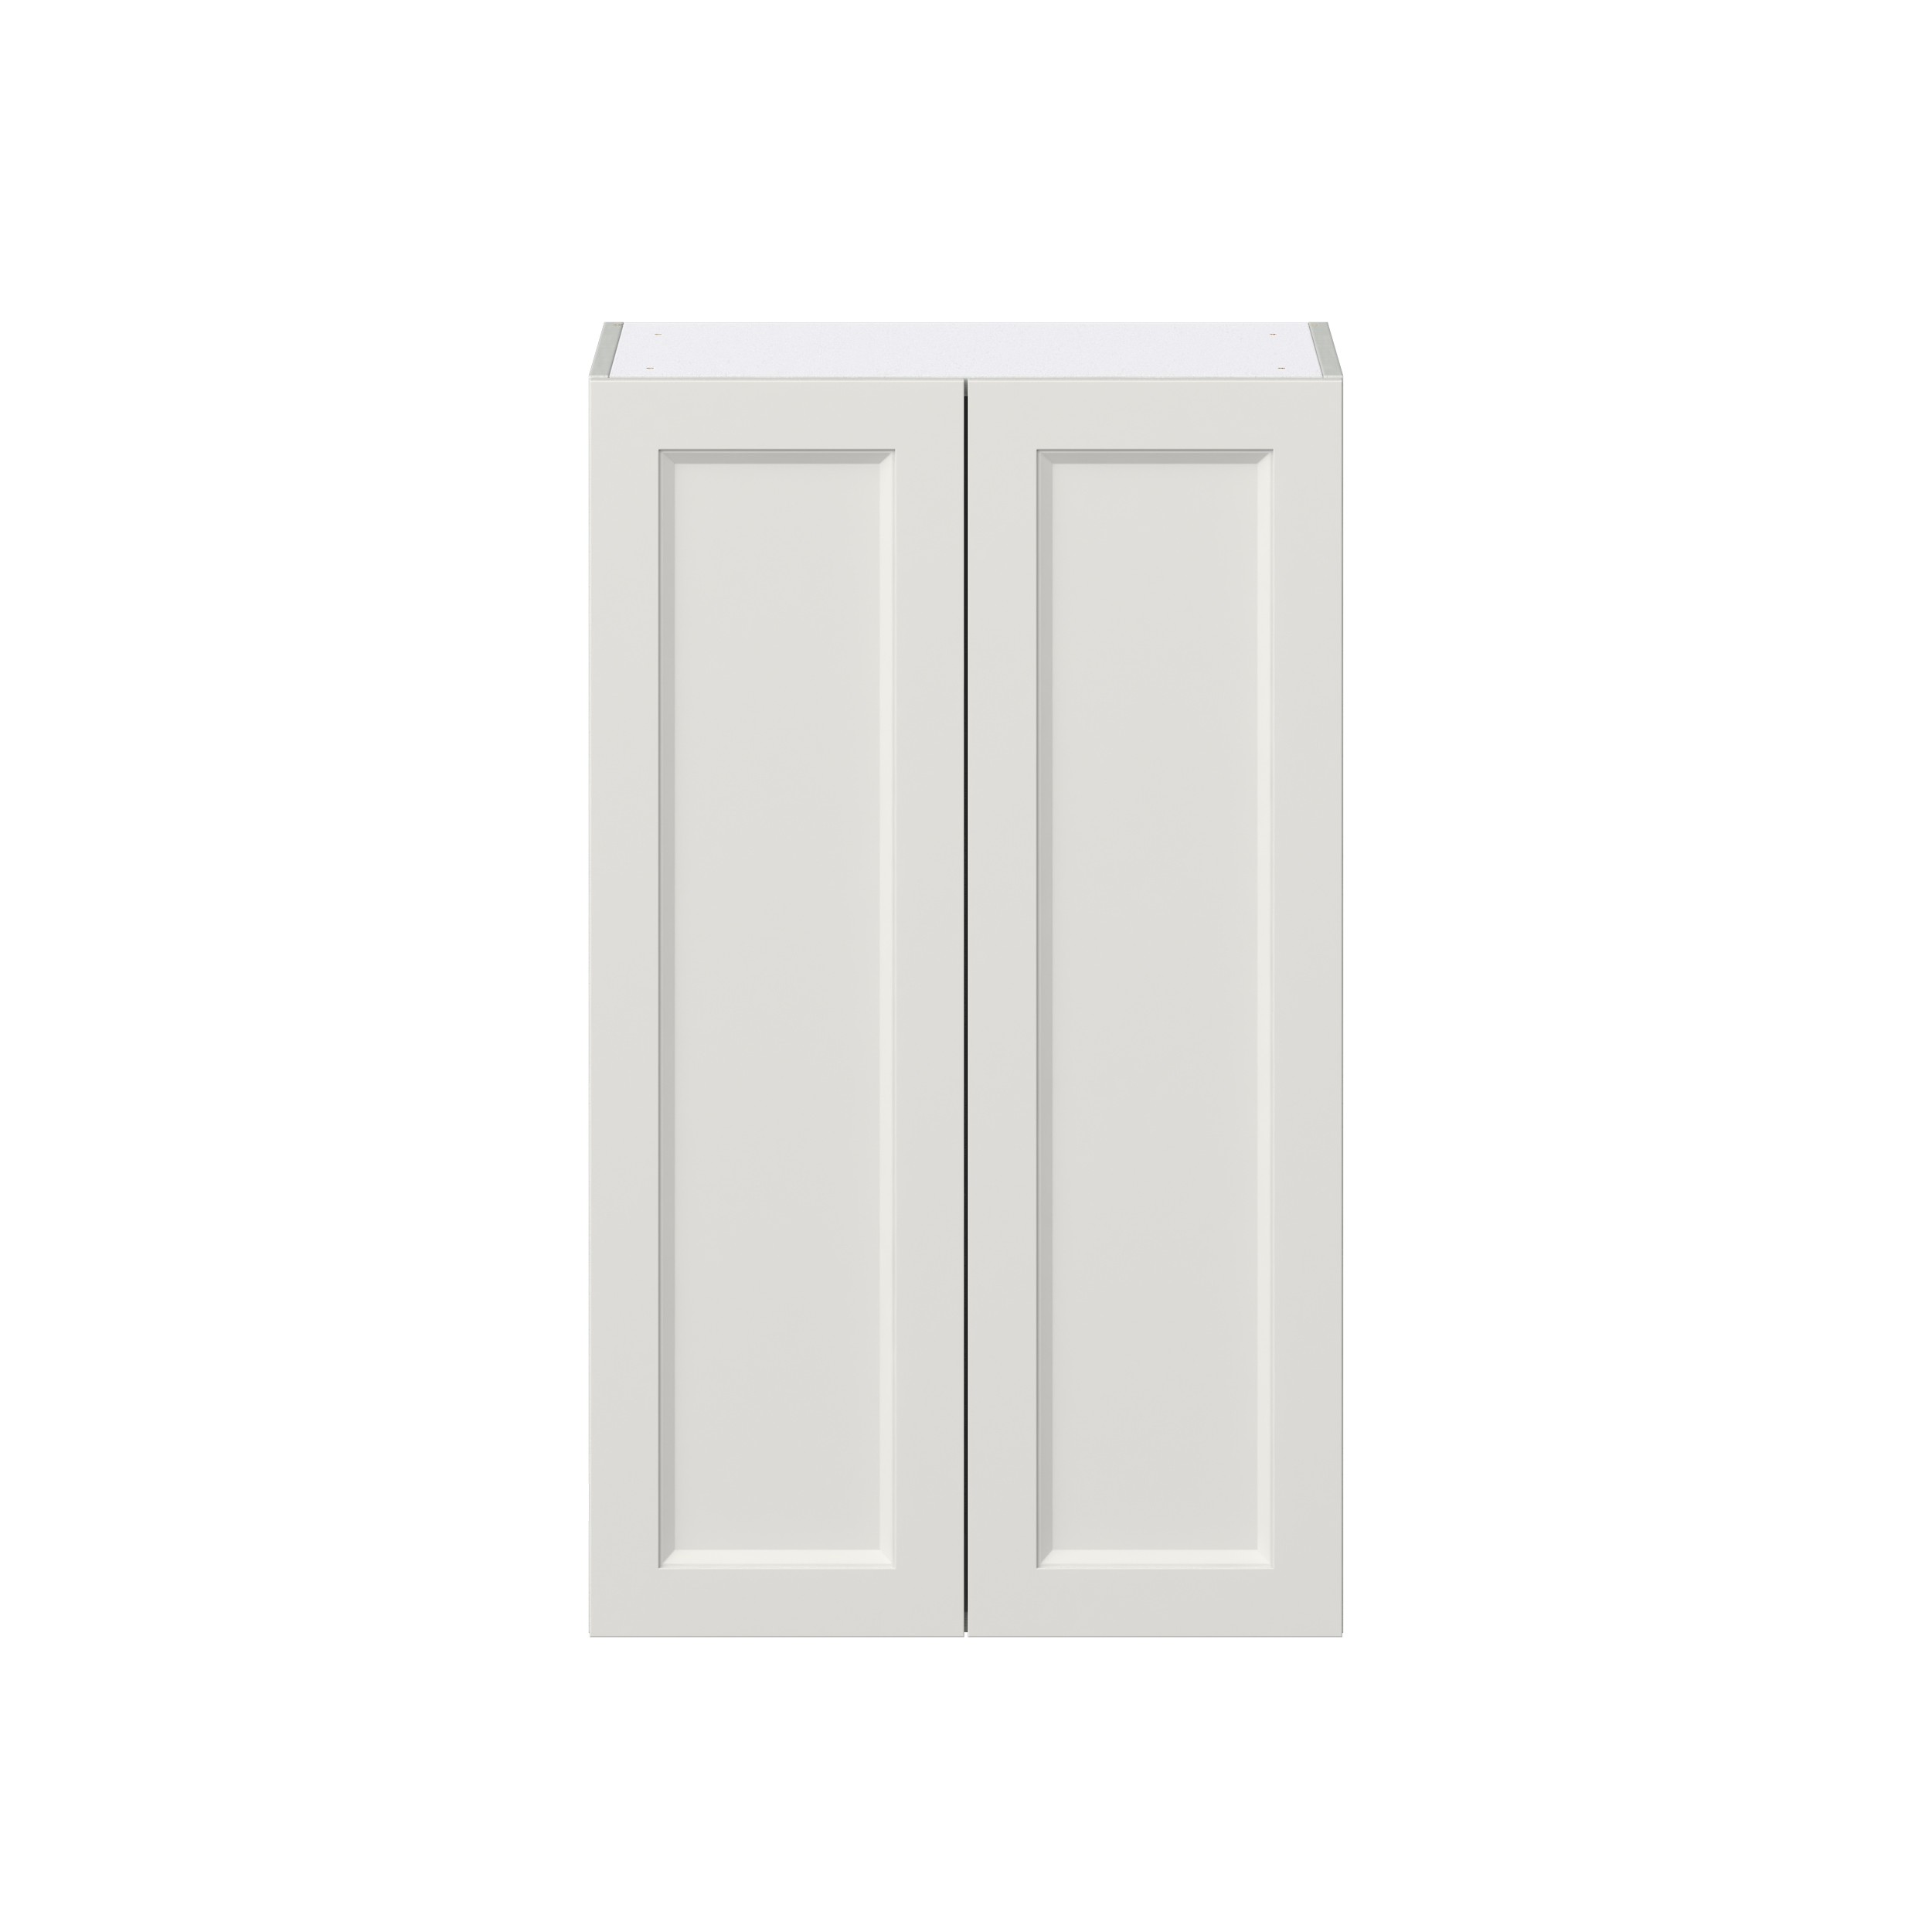 Wisteria Painted Light Gray Recessed Assembled Wall Cabinet with 2 Full High Doors (24 in. W x 40 in. H x 14 in. D)